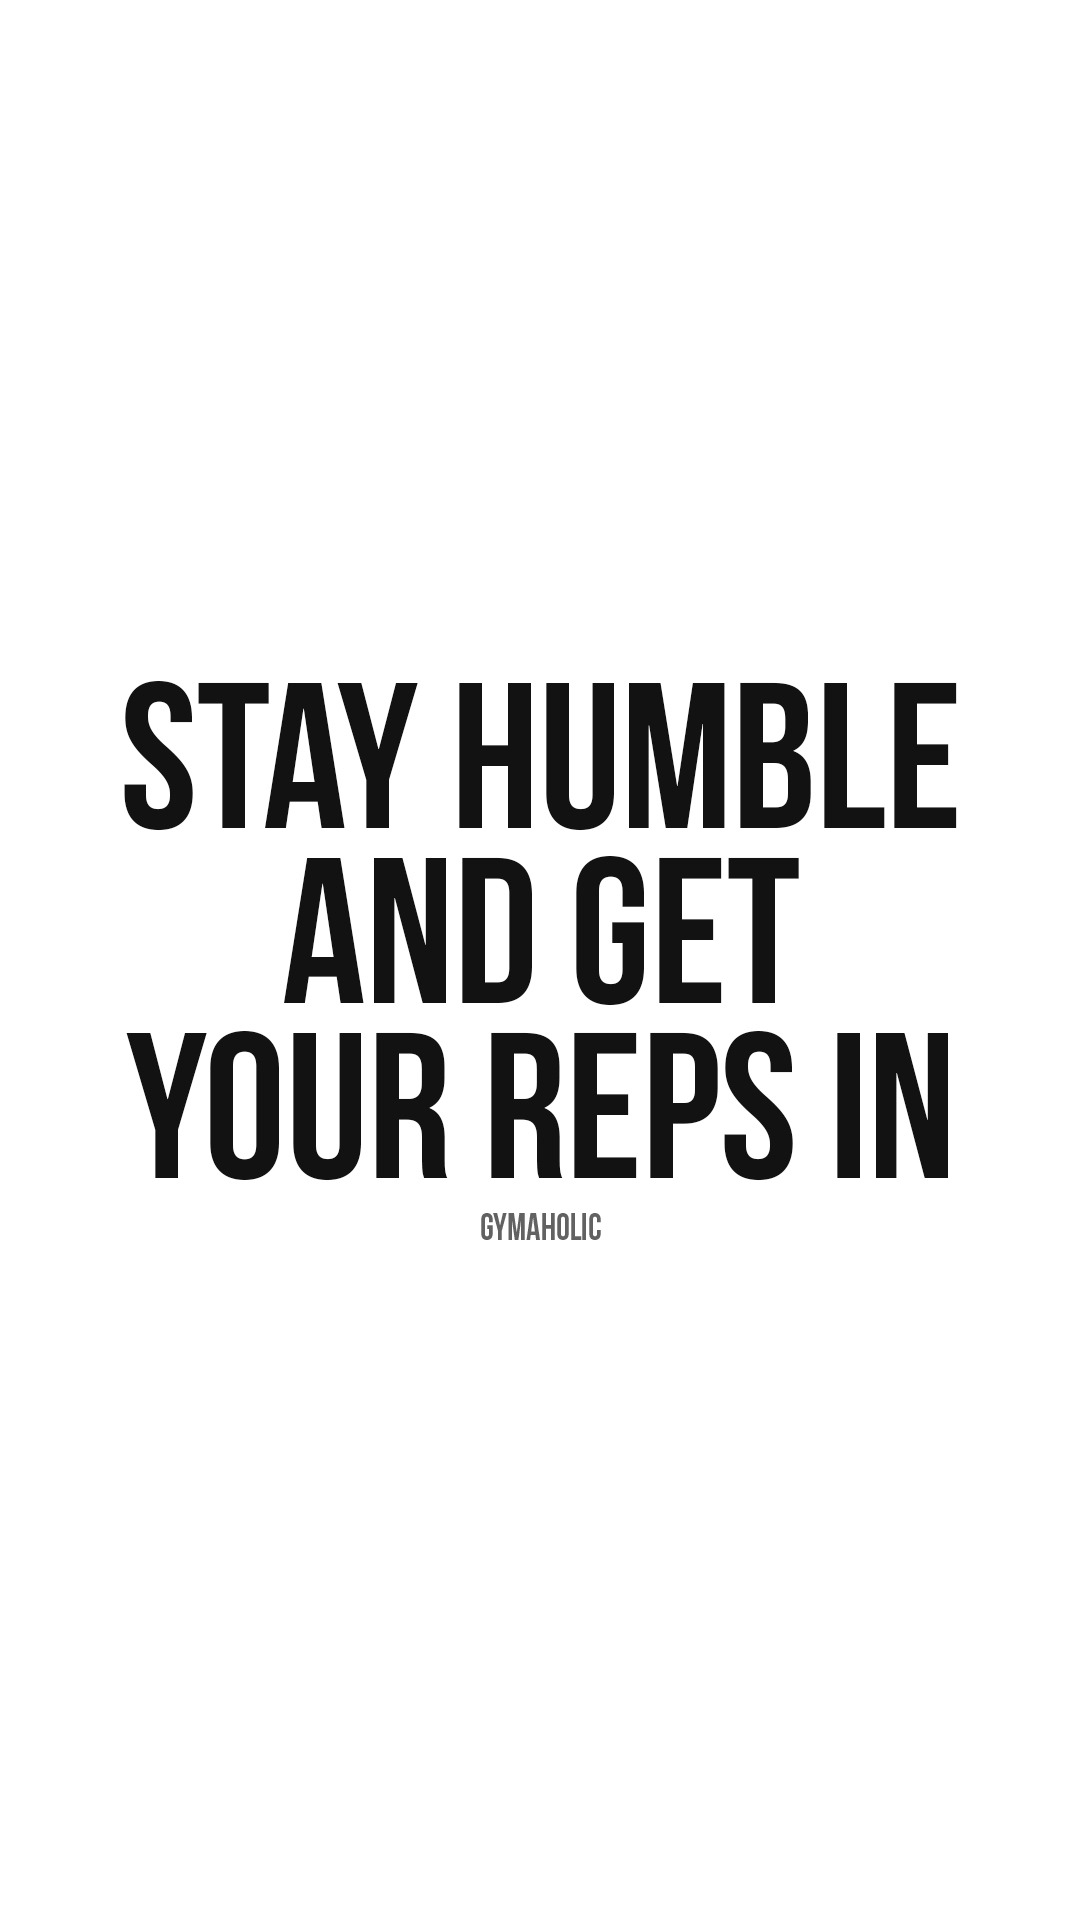 Stay humble and get your reps in